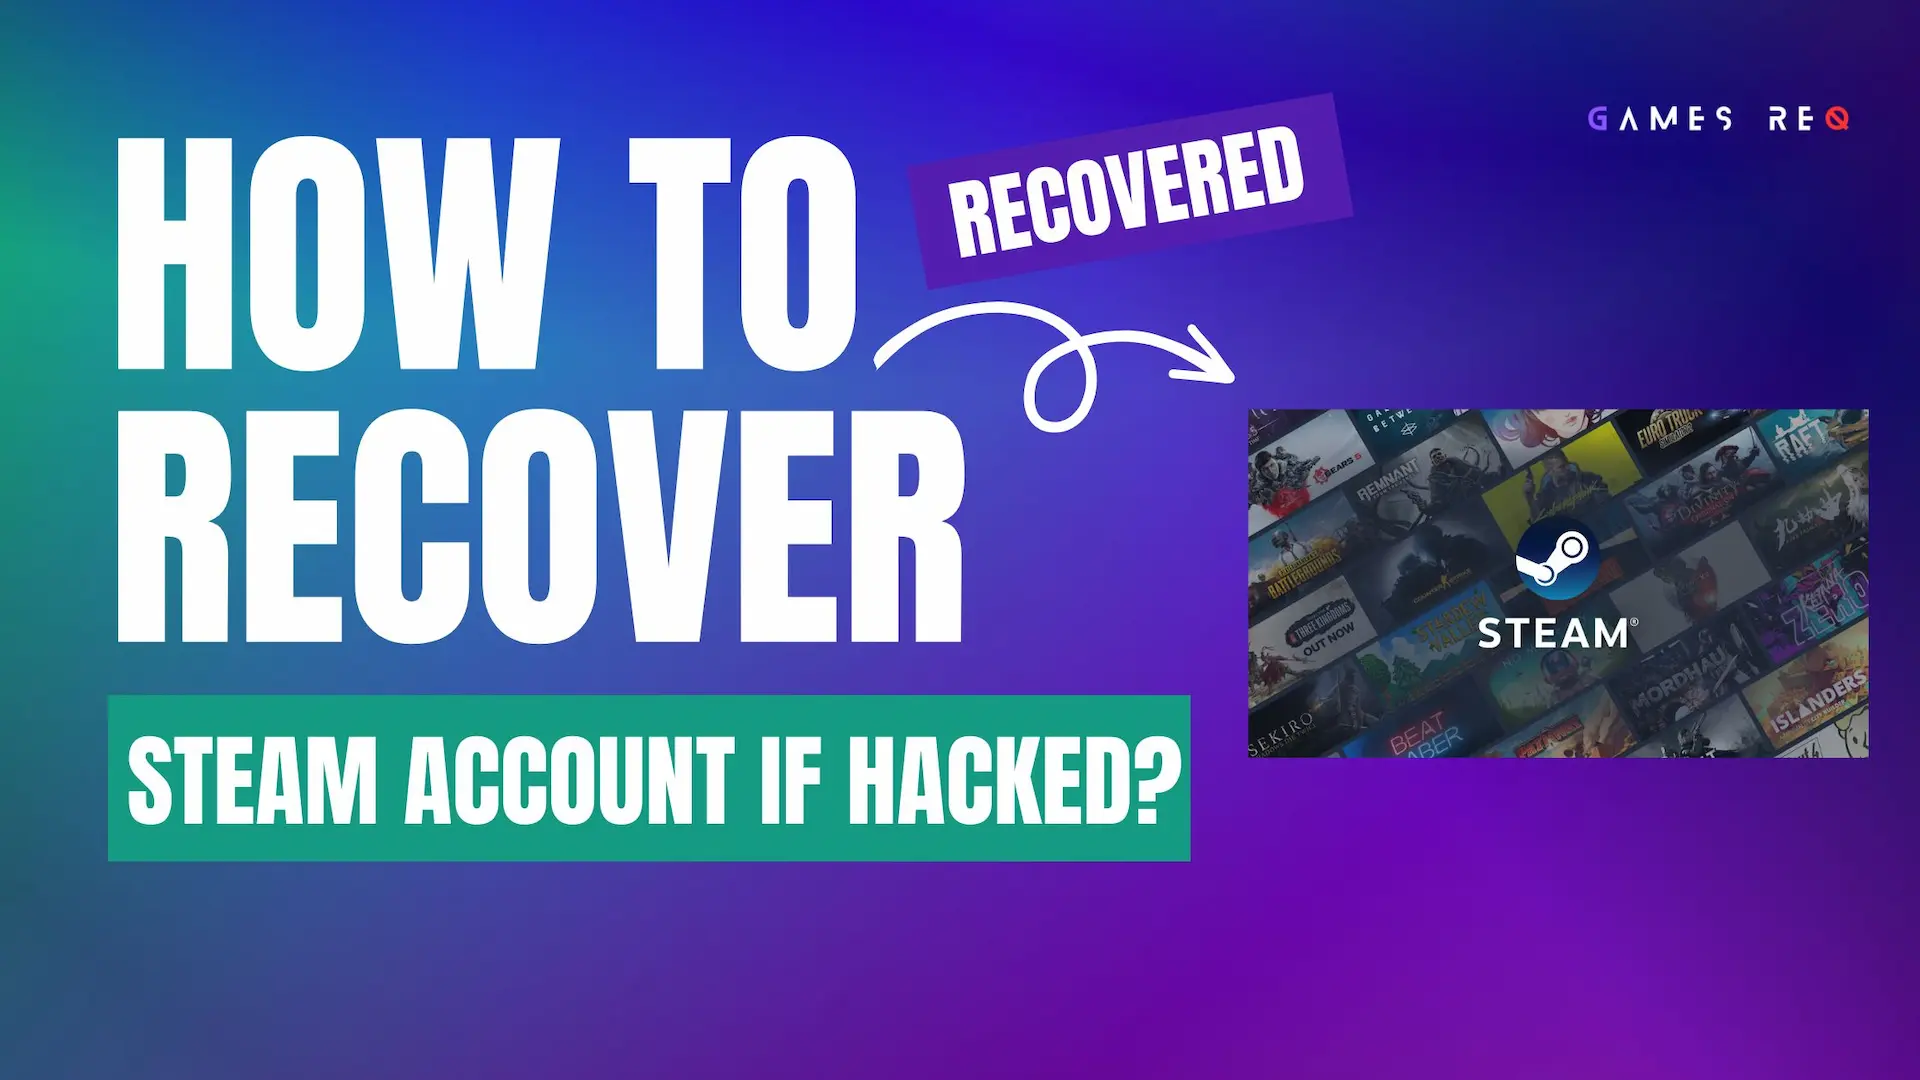 How To Recover Steam Account if Hacked Recovered Step by Step Guide With Pictures